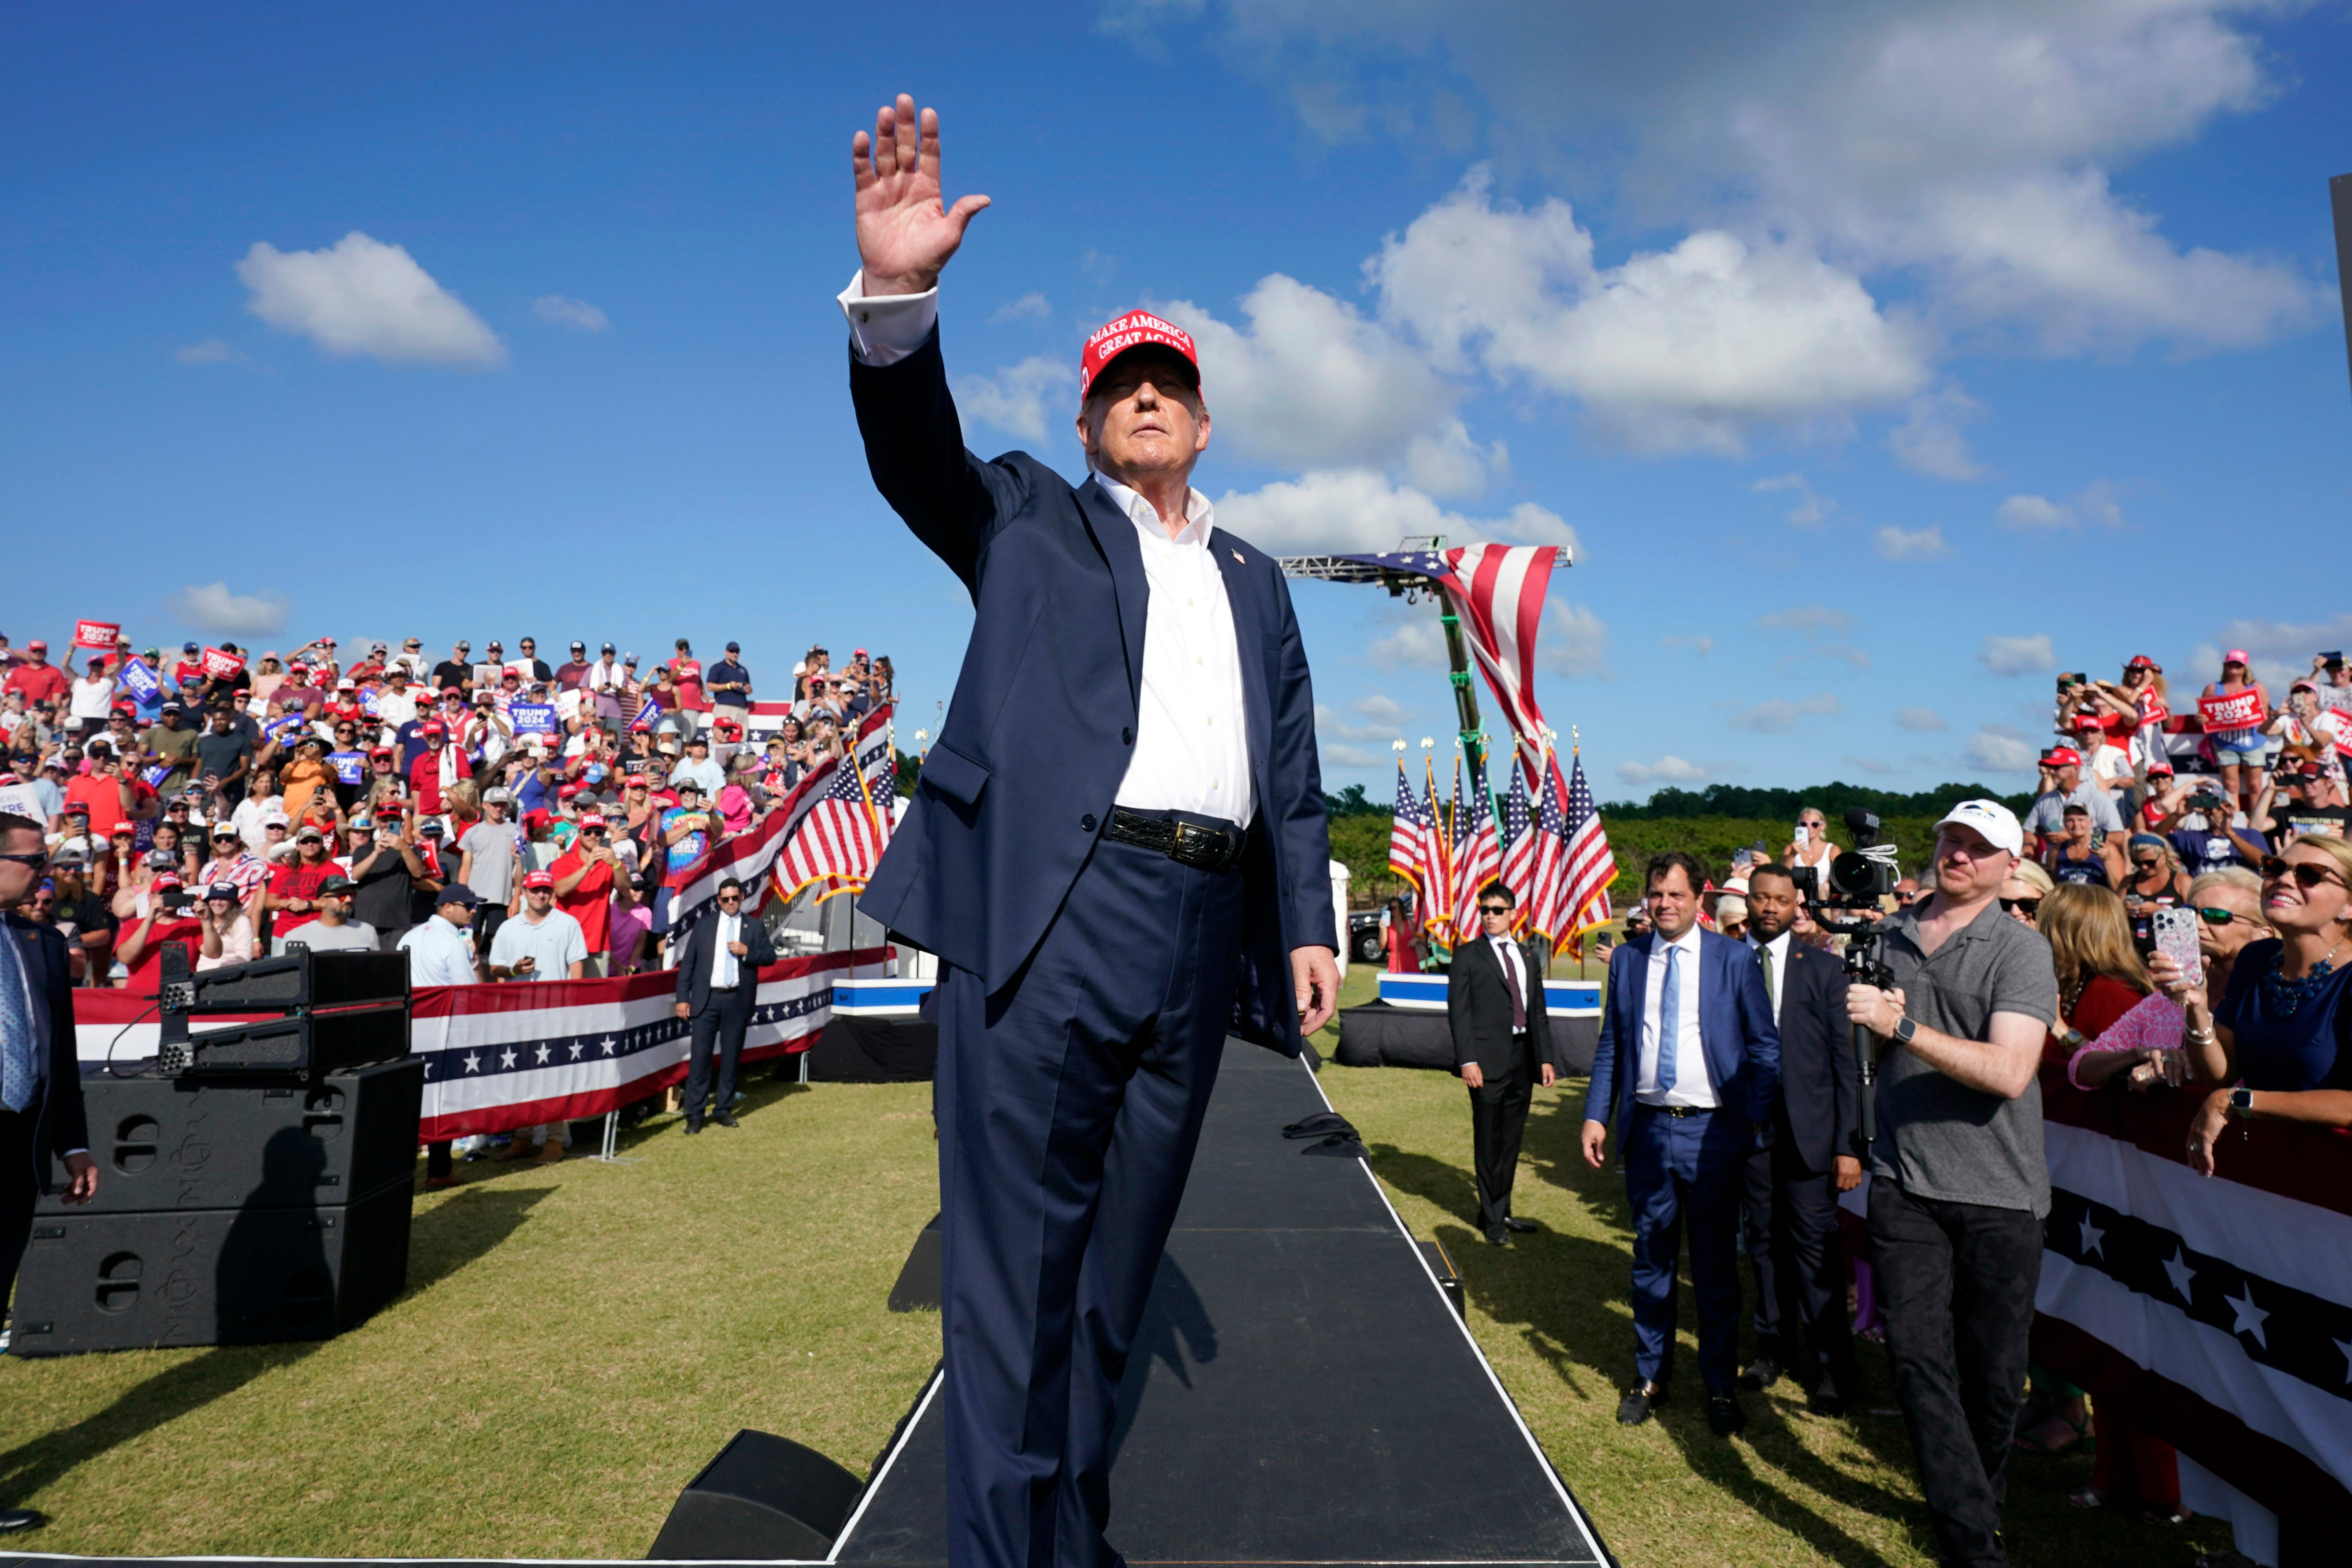 Donald Trump greets supporters at a rally in Virginia on June 28, three days before the Supreme Court granted him partial immunity in his election interference case.